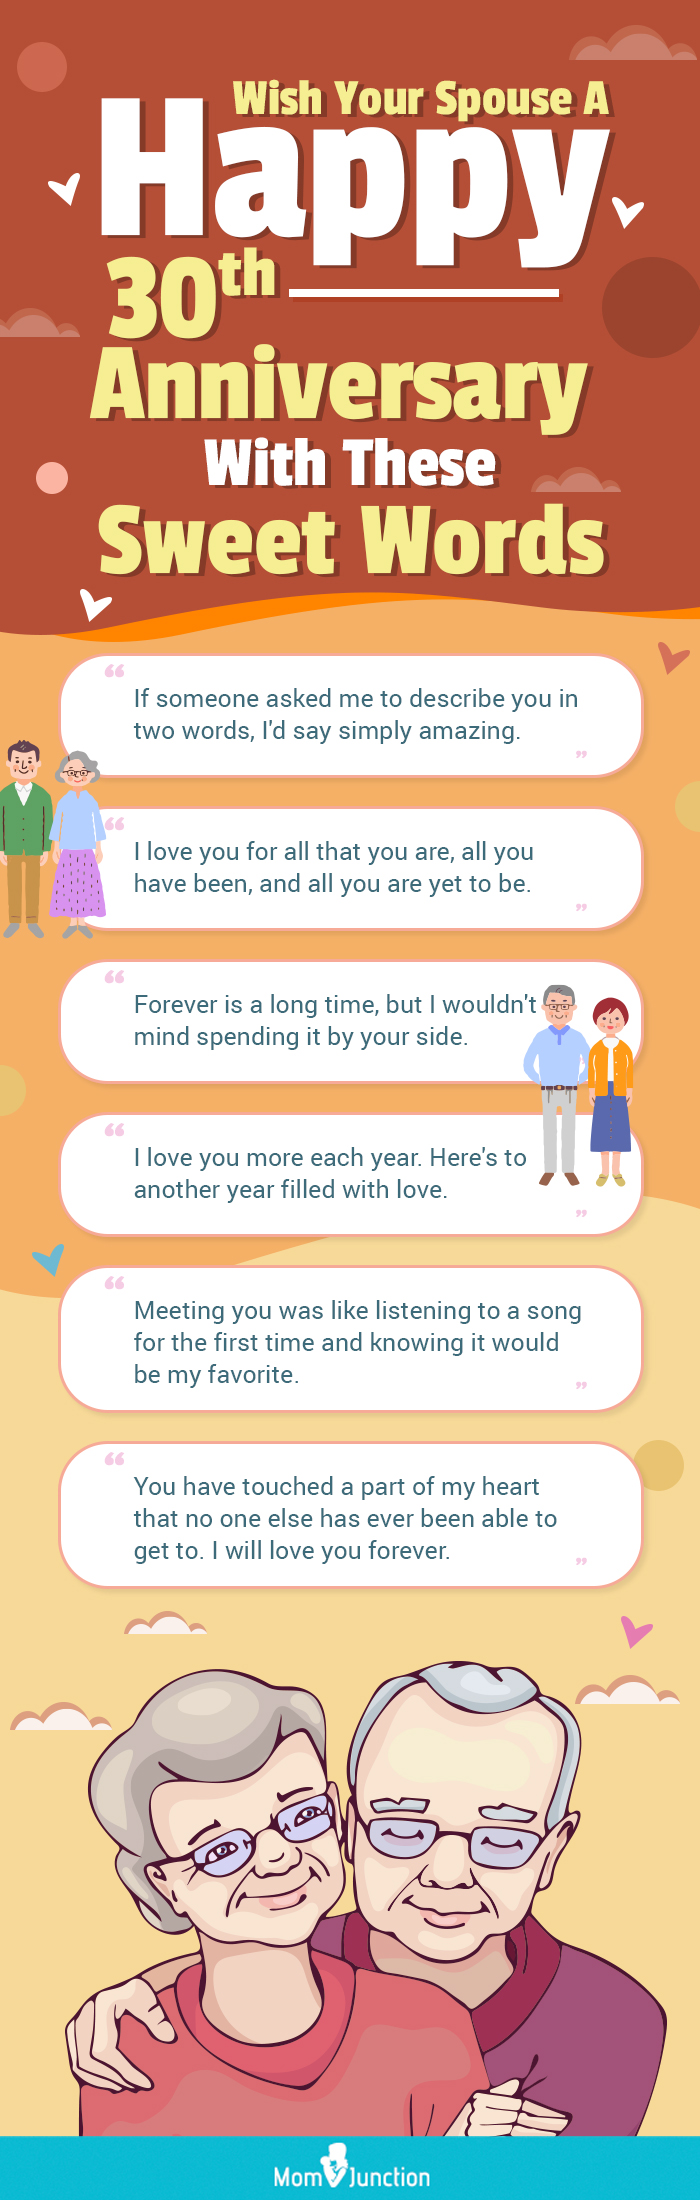 wish your spouse a happy 30th anniversary with these sweet words (infographic)